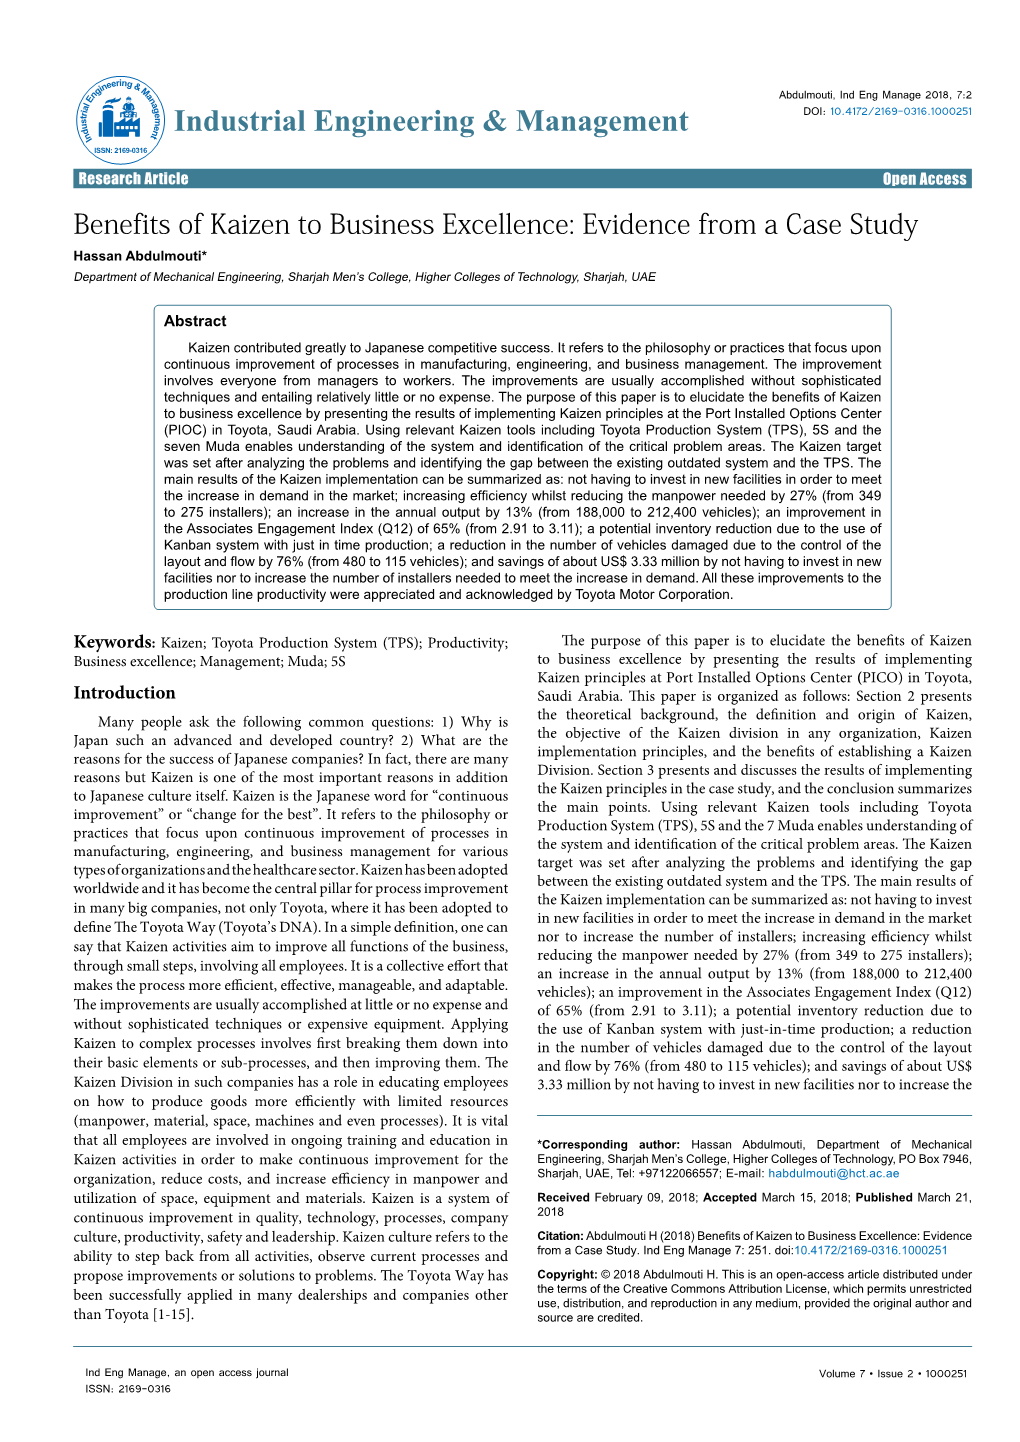 Benefits of Kaizen to Business Excellence: Evidence from a Case